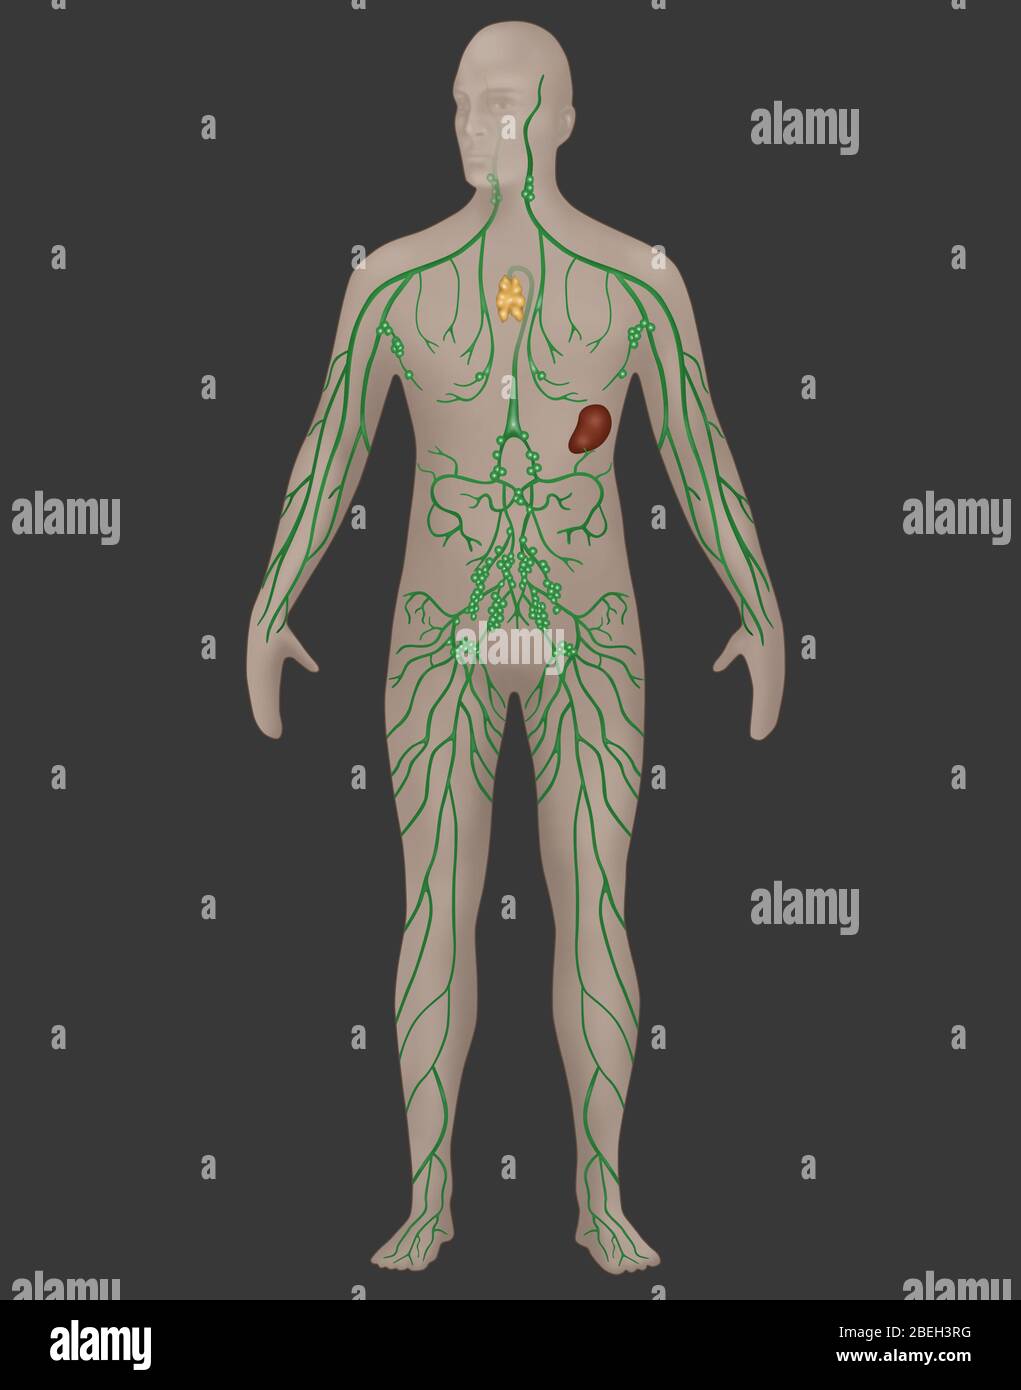 Lymphatic System in Male Anatomy Stock Photo